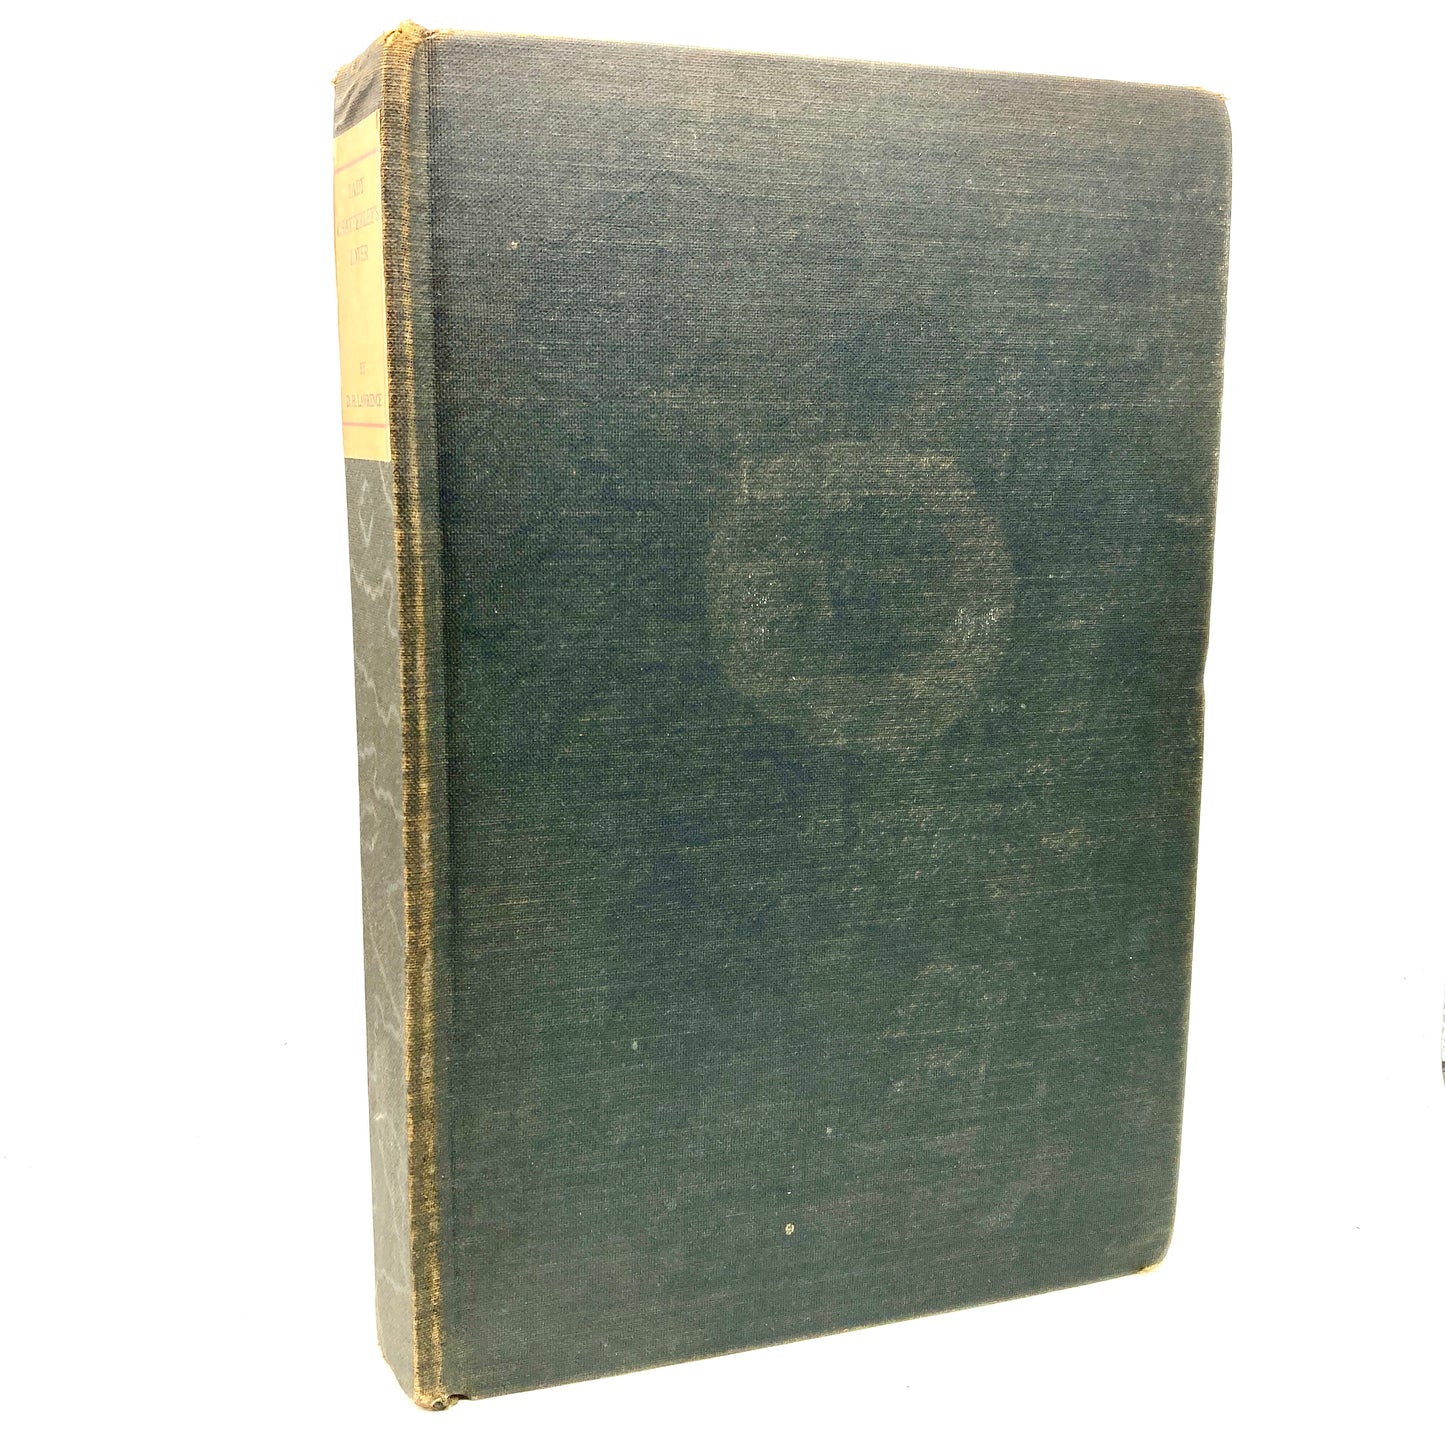 LAWRENCE, D.H. "Lady Chatterly's Lover" [Privately Printed, 1928] Pirated Edition